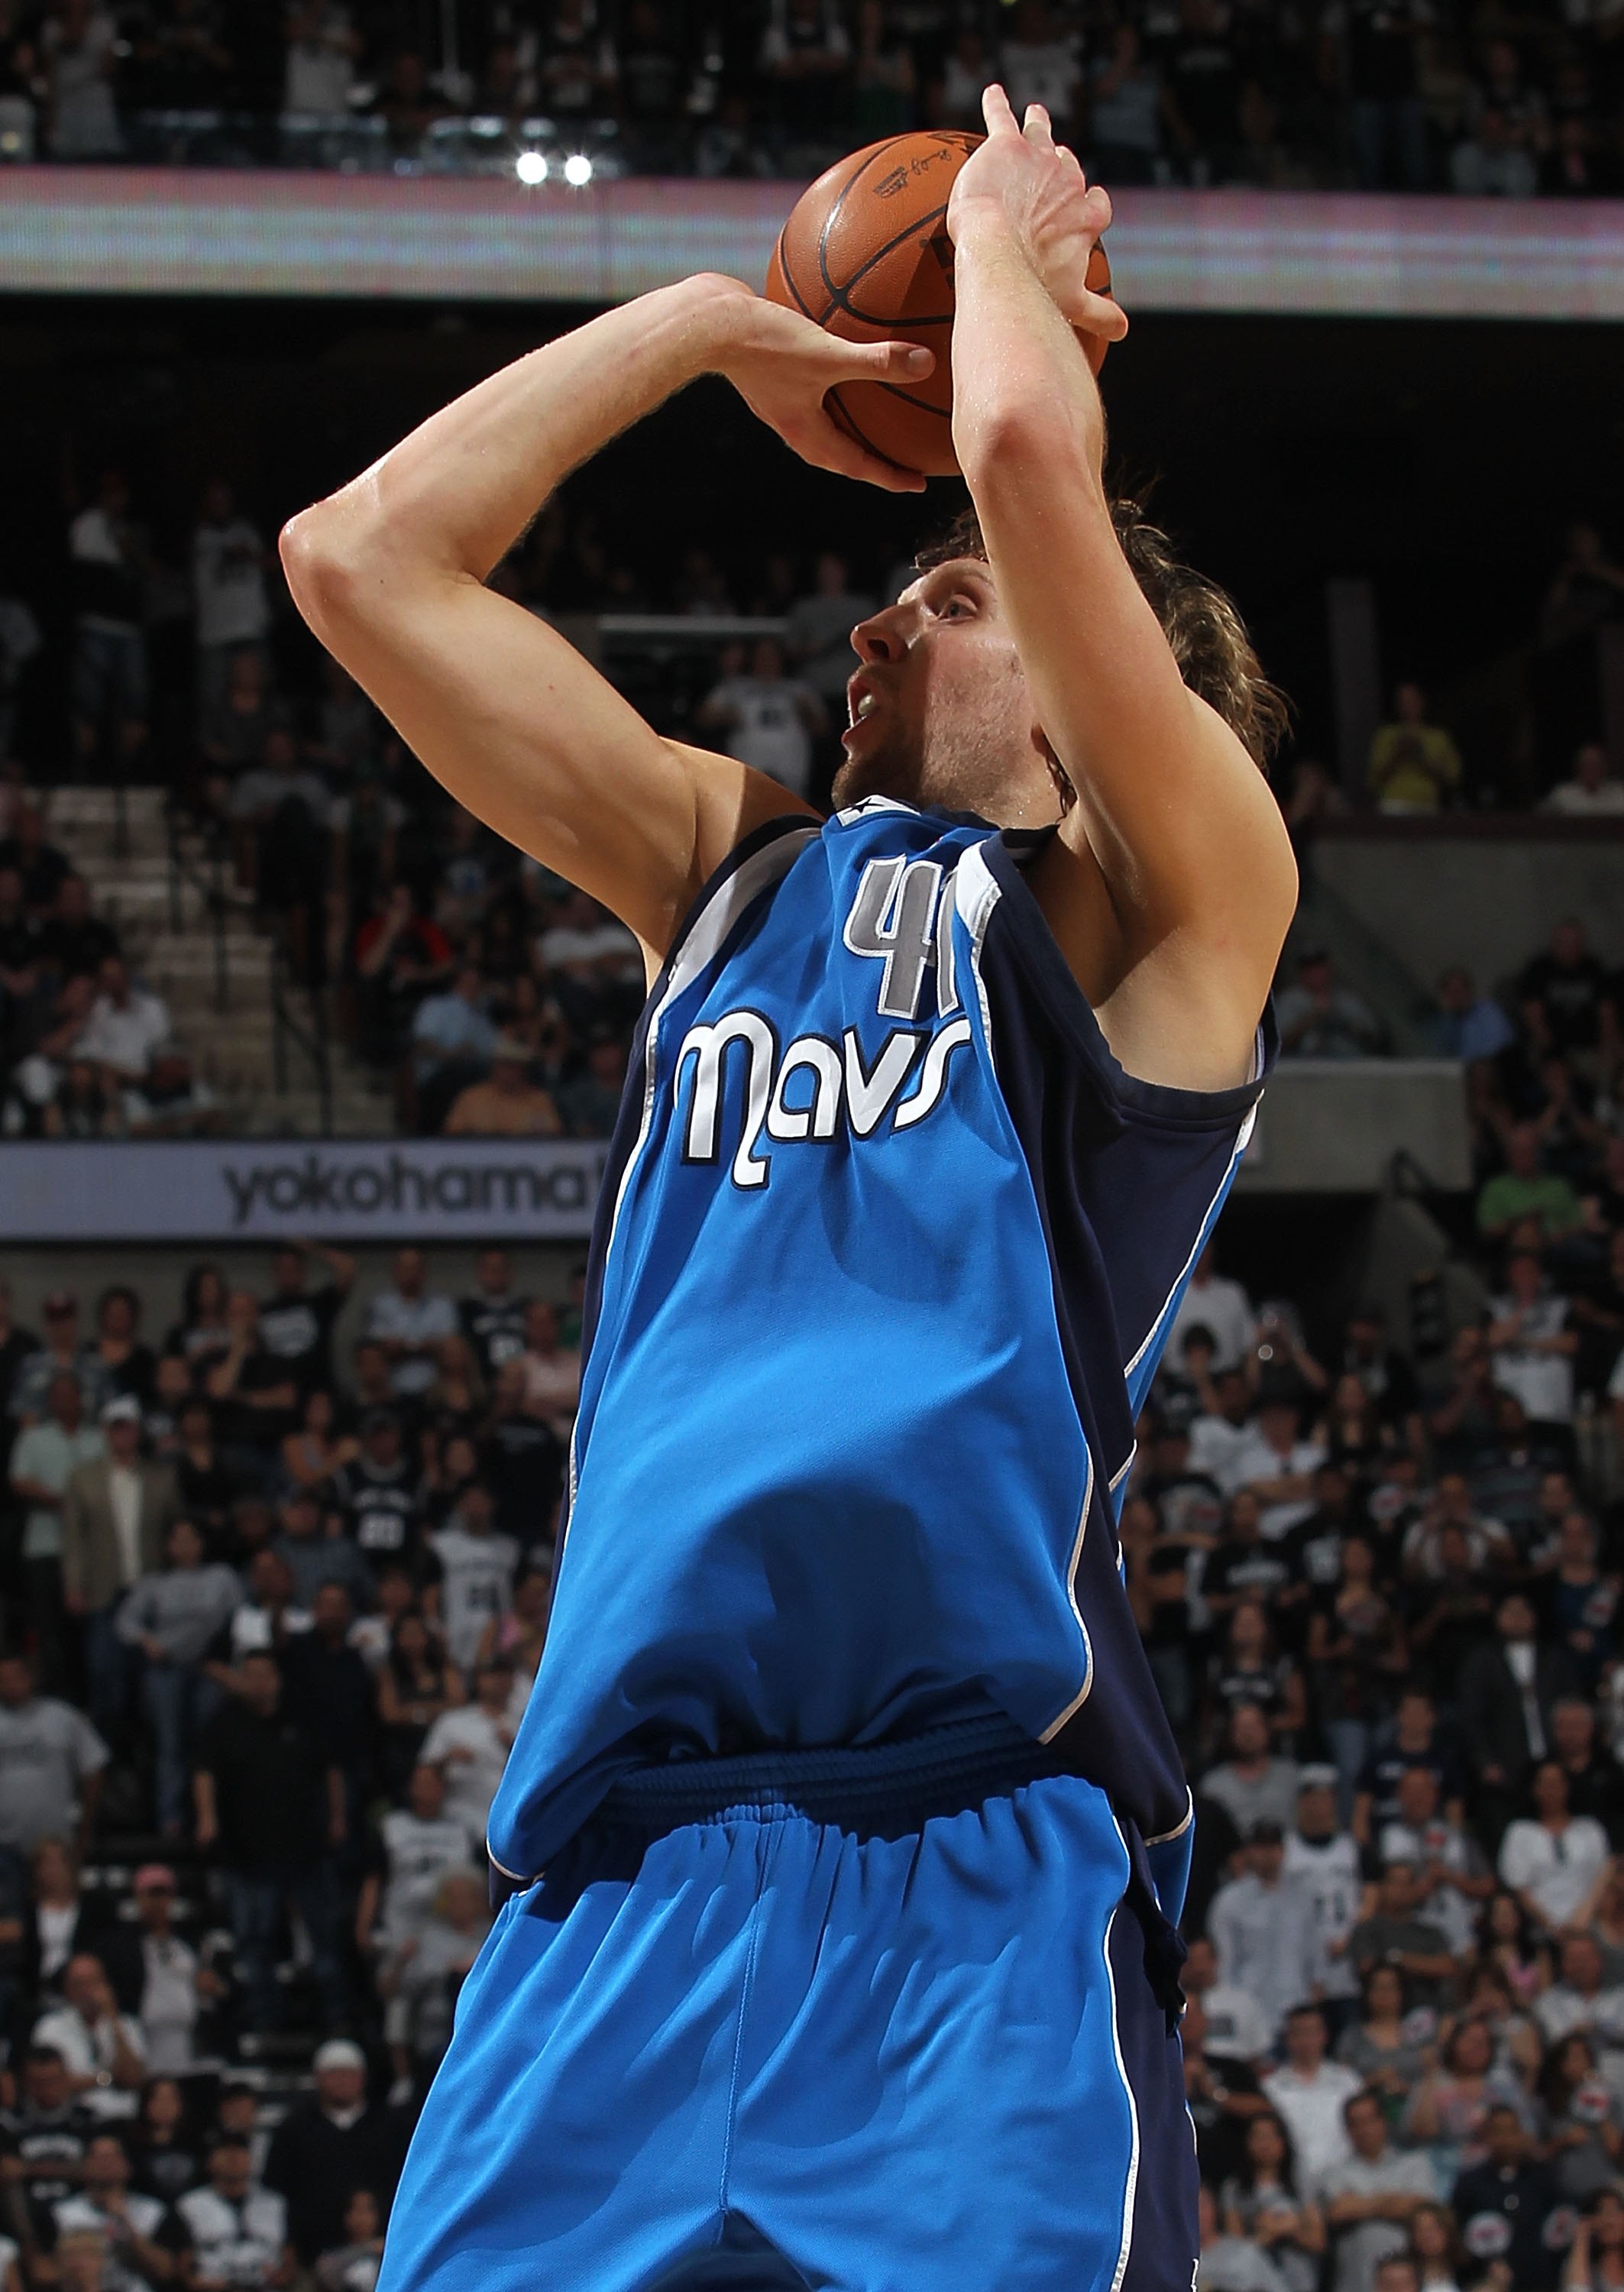 SAN ANTONIO - APRIL 25:  Dirk Nowitzki #41 of the Dallas Mavericks in Game Four of the Western Conference Quarterfinals during the 2010 NBA Playoffs at AT&T Center on April 25, 2010 in San Antonio, Texas. NOTE TO USER: User expressly acknowledges and agre